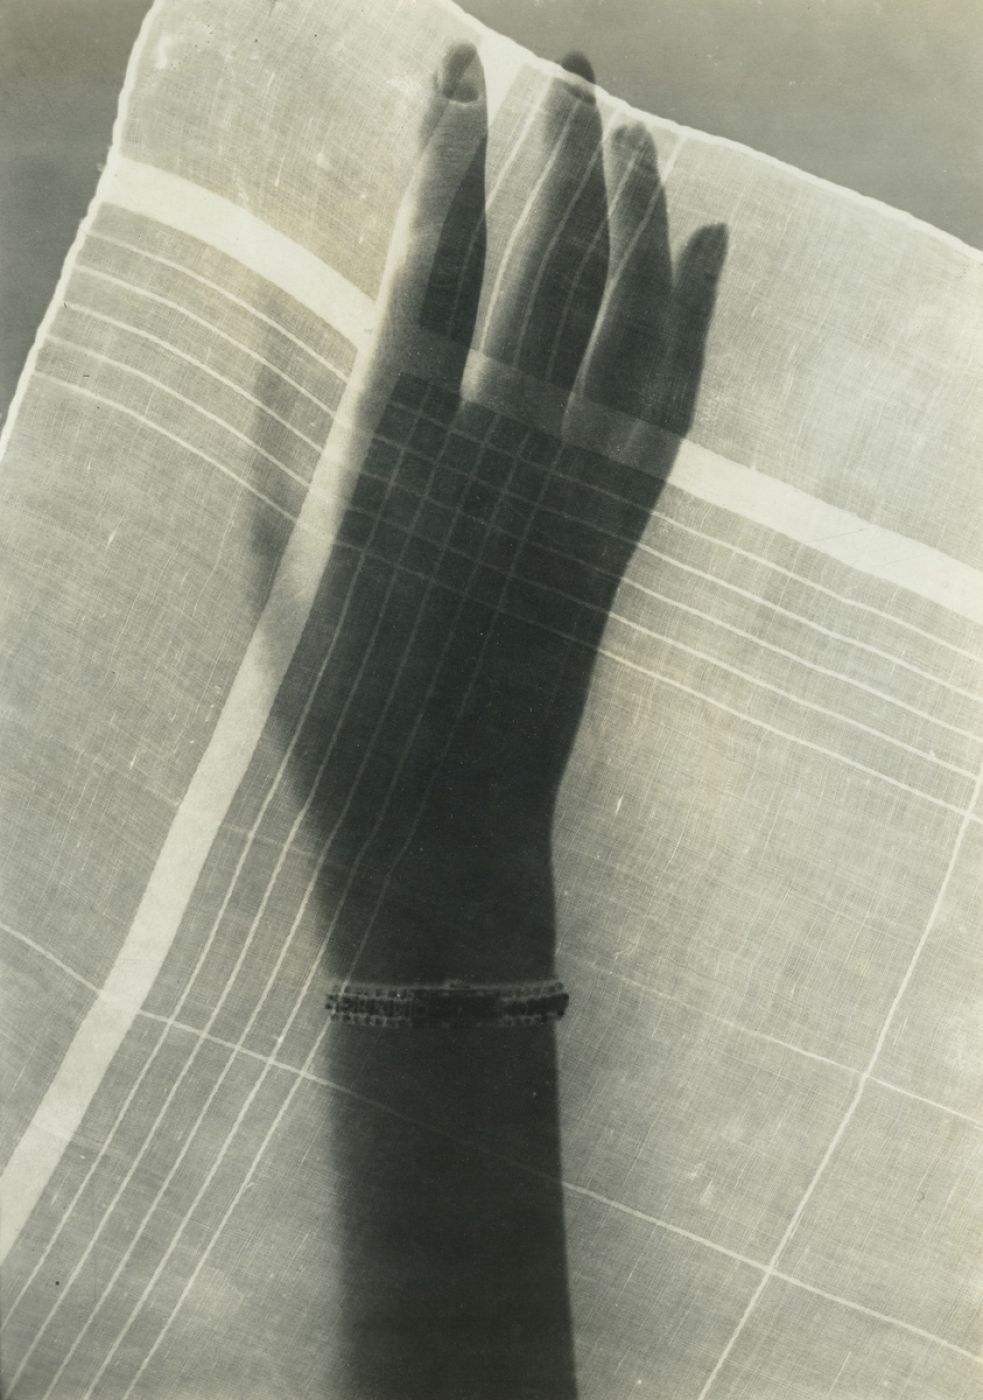 Anonymous, “Untitled (Study of a Hand)”, 1930 ca.